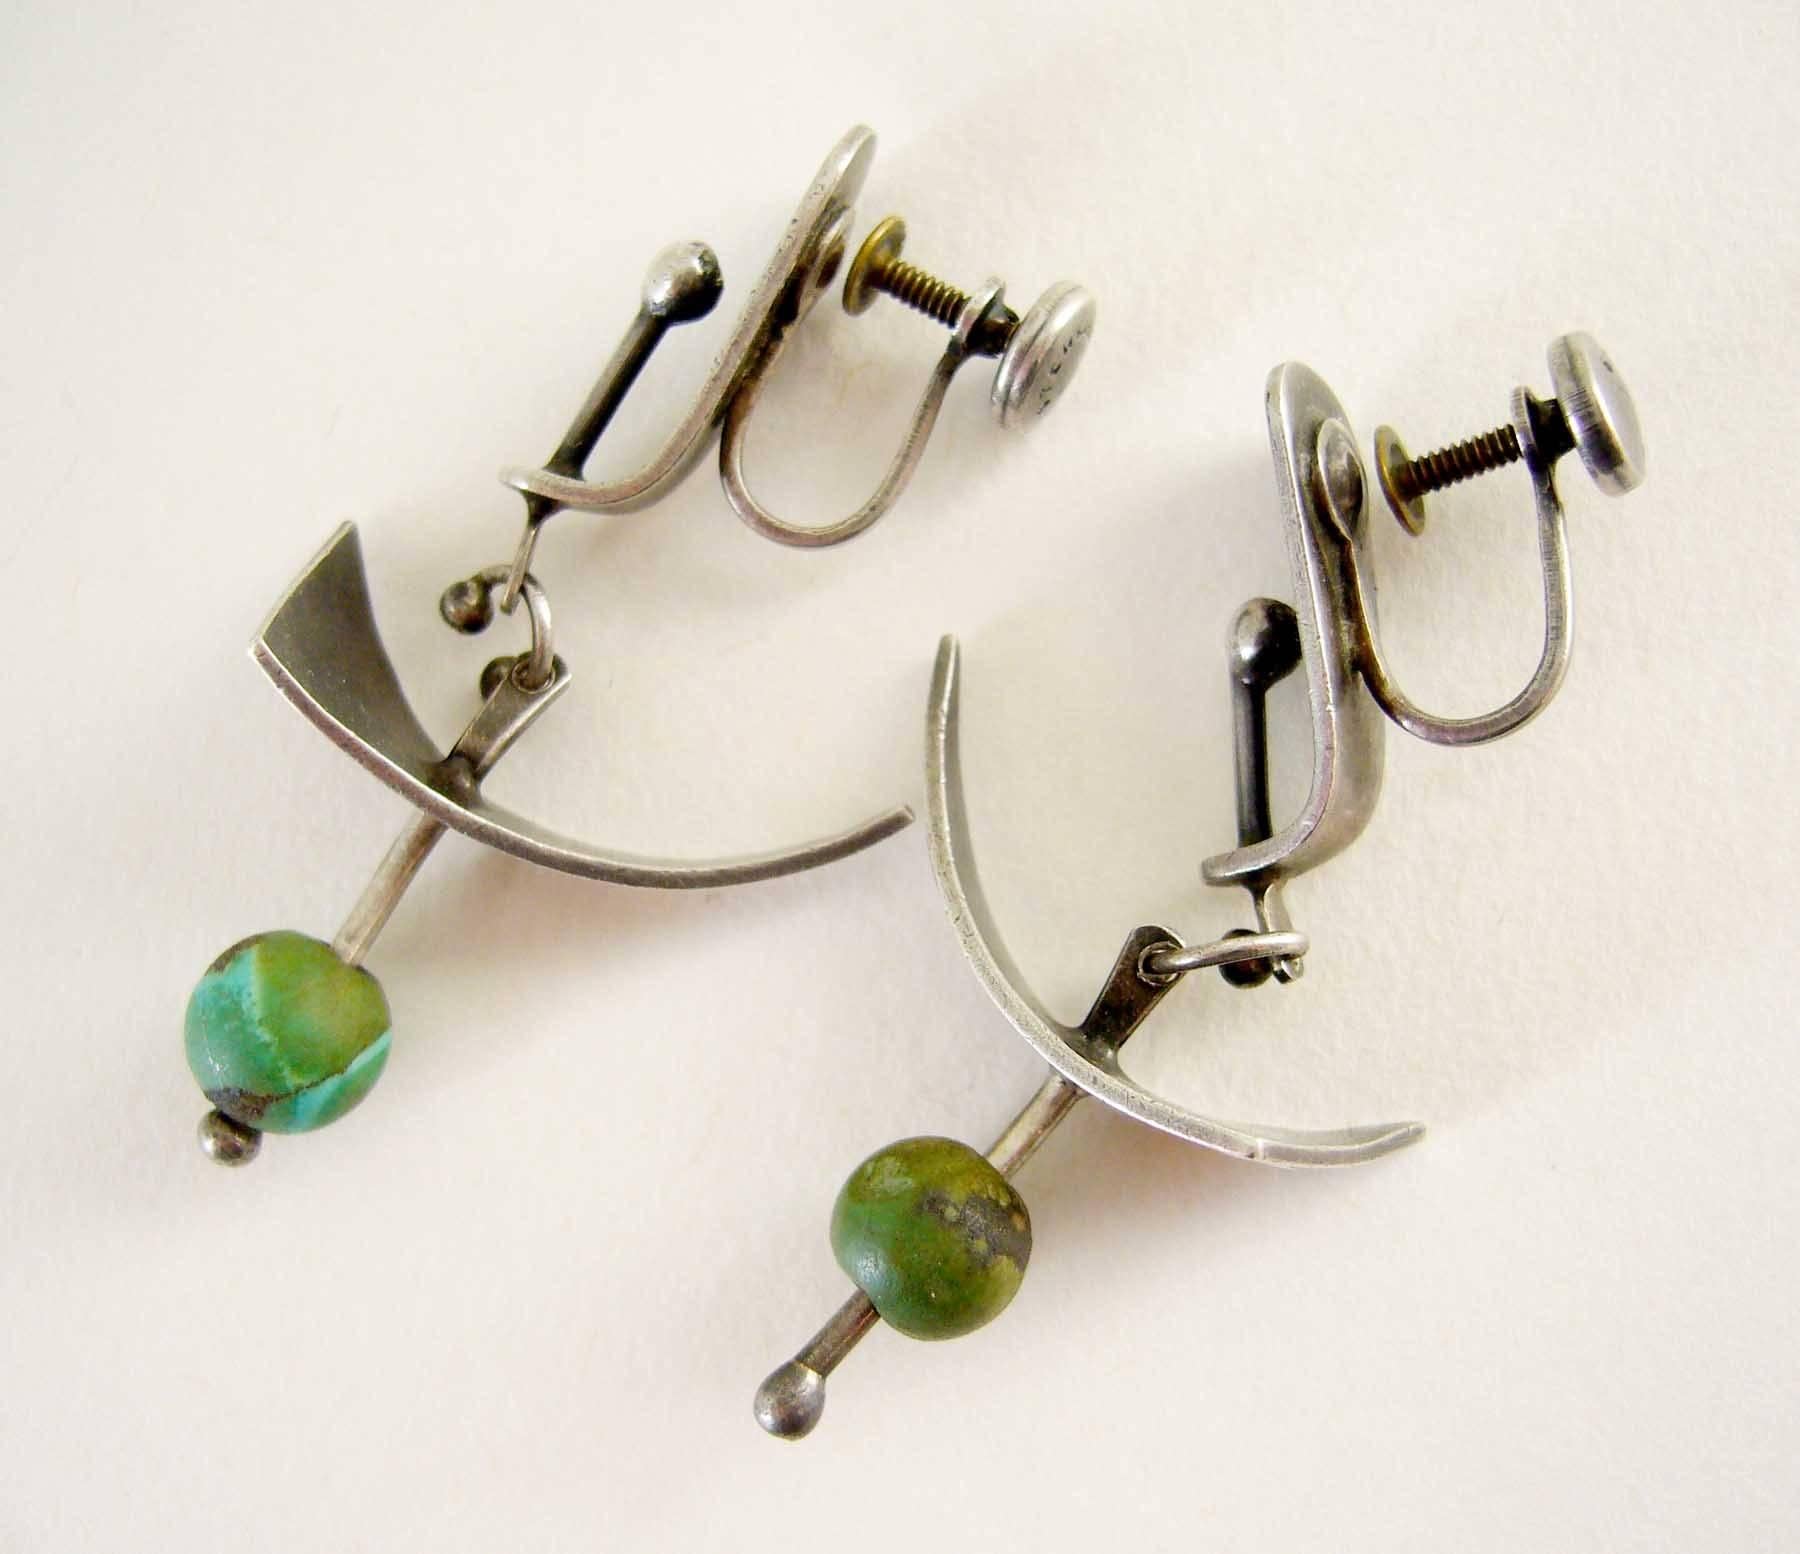 Abstract modern screwback earrings in sterling silver with turquoise bead accent circa 1950's.  Earrings were created by Ed Wiener of New York City, New York and measure 1.75